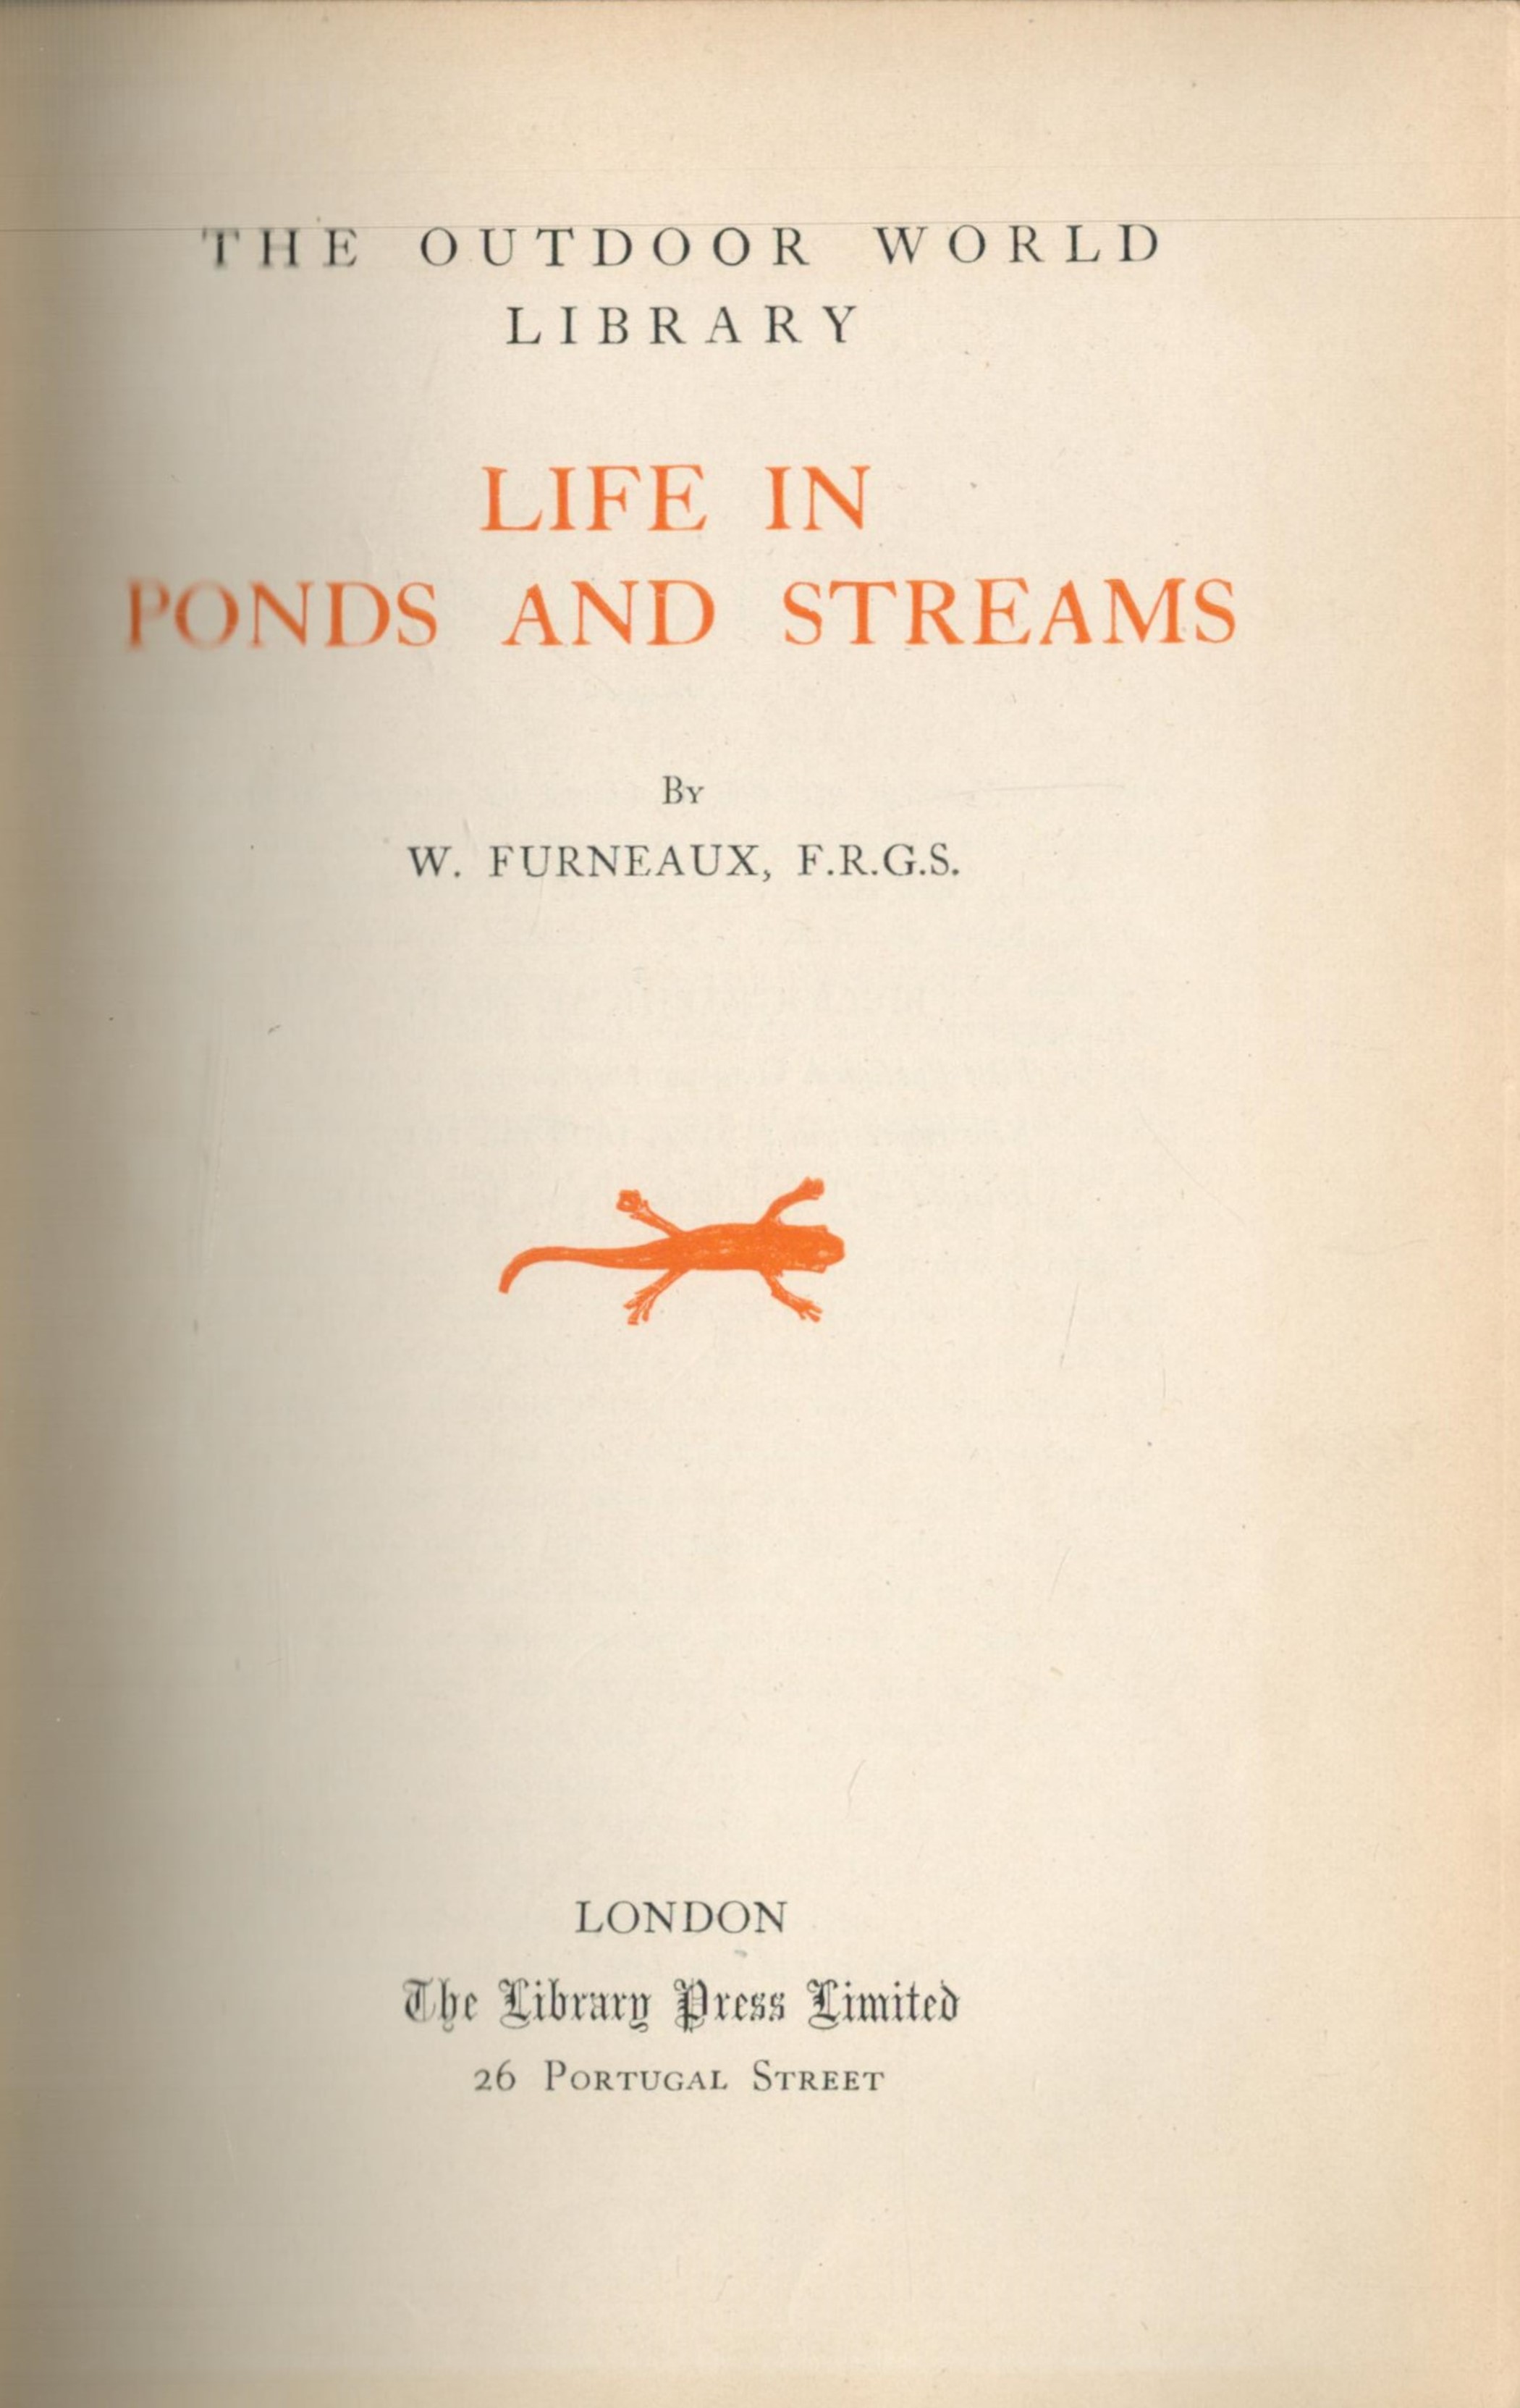 Life In Ponds and Streams by W Furneaux 1923 Fifth Edition Hardback Book with 406 pages published by - Image 2 of 3